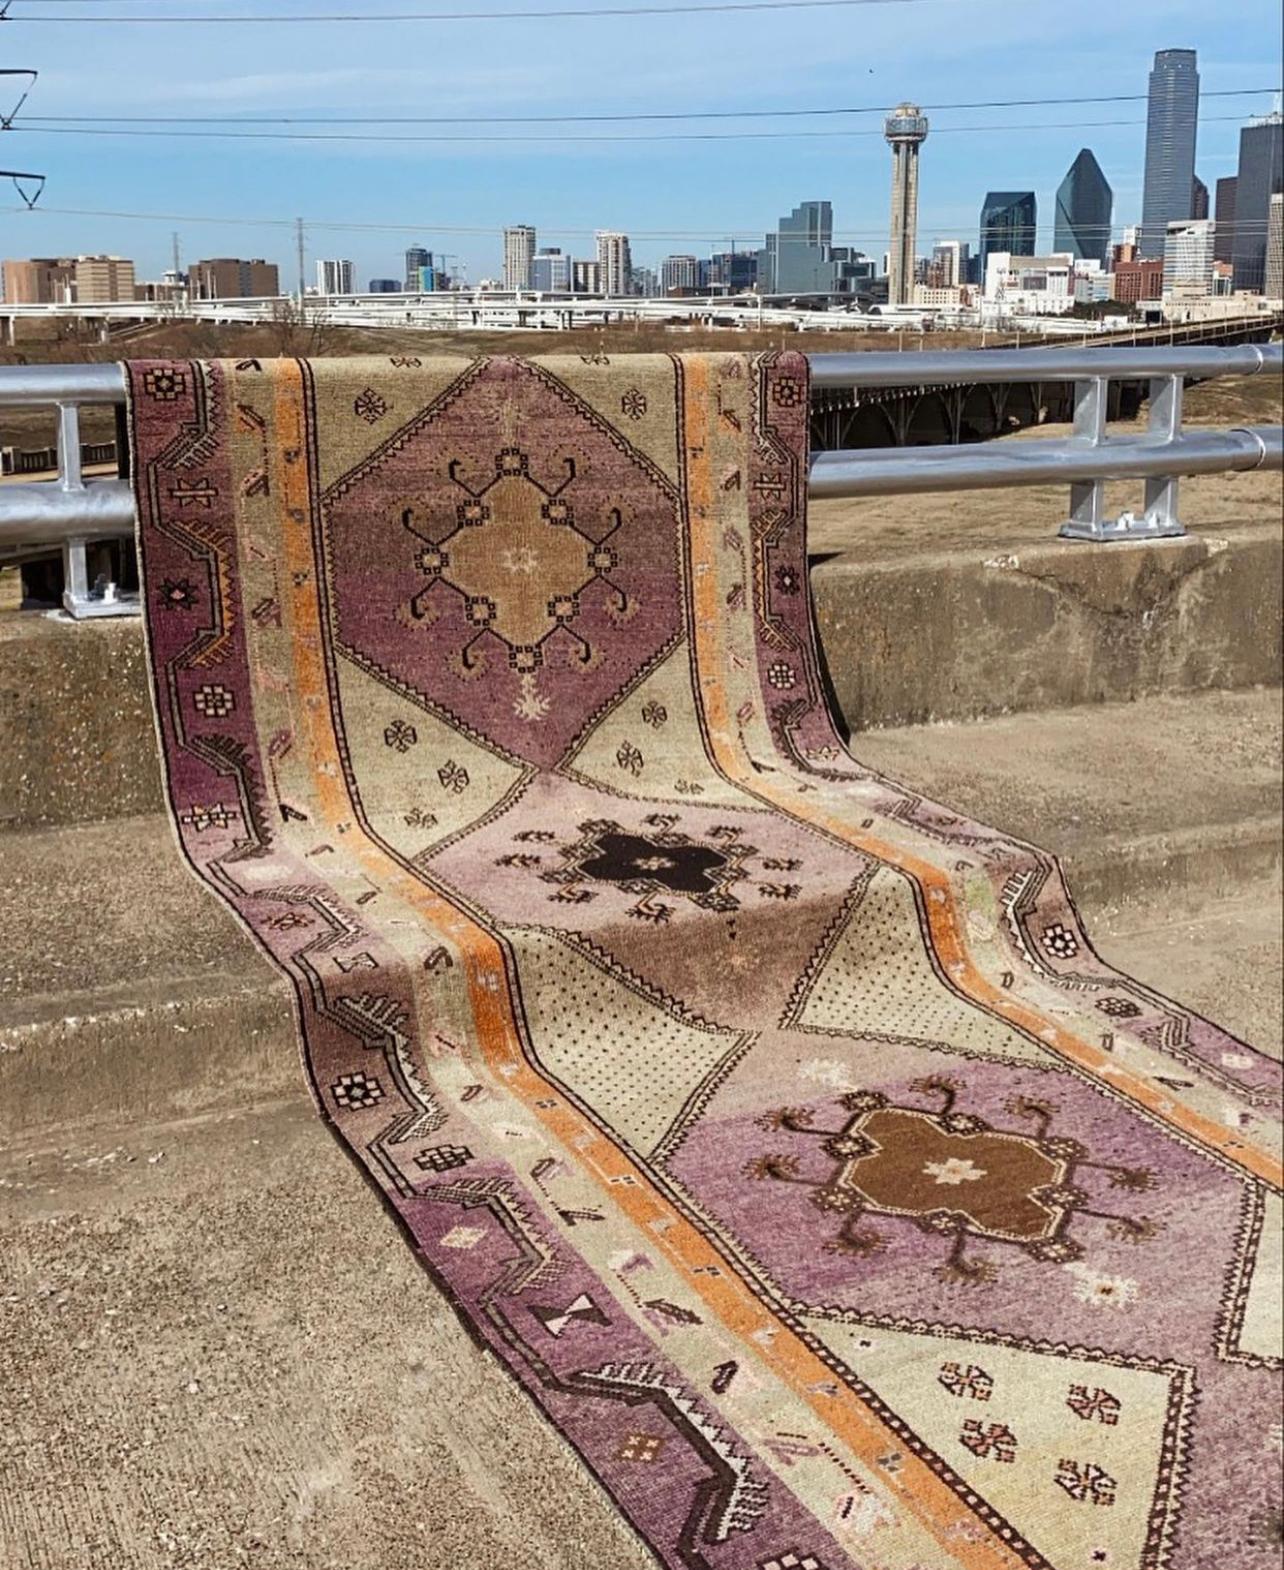 52169 Vintage Turkish Oushak Gallery Rug with Modern Bohemian Style, Extra-Long Hallway Runner 05'06 x 18'02. ​Warm earth-tones with pastel purple hues combined with floral elements of the Prairie School Movement collide in this hand knotted wool